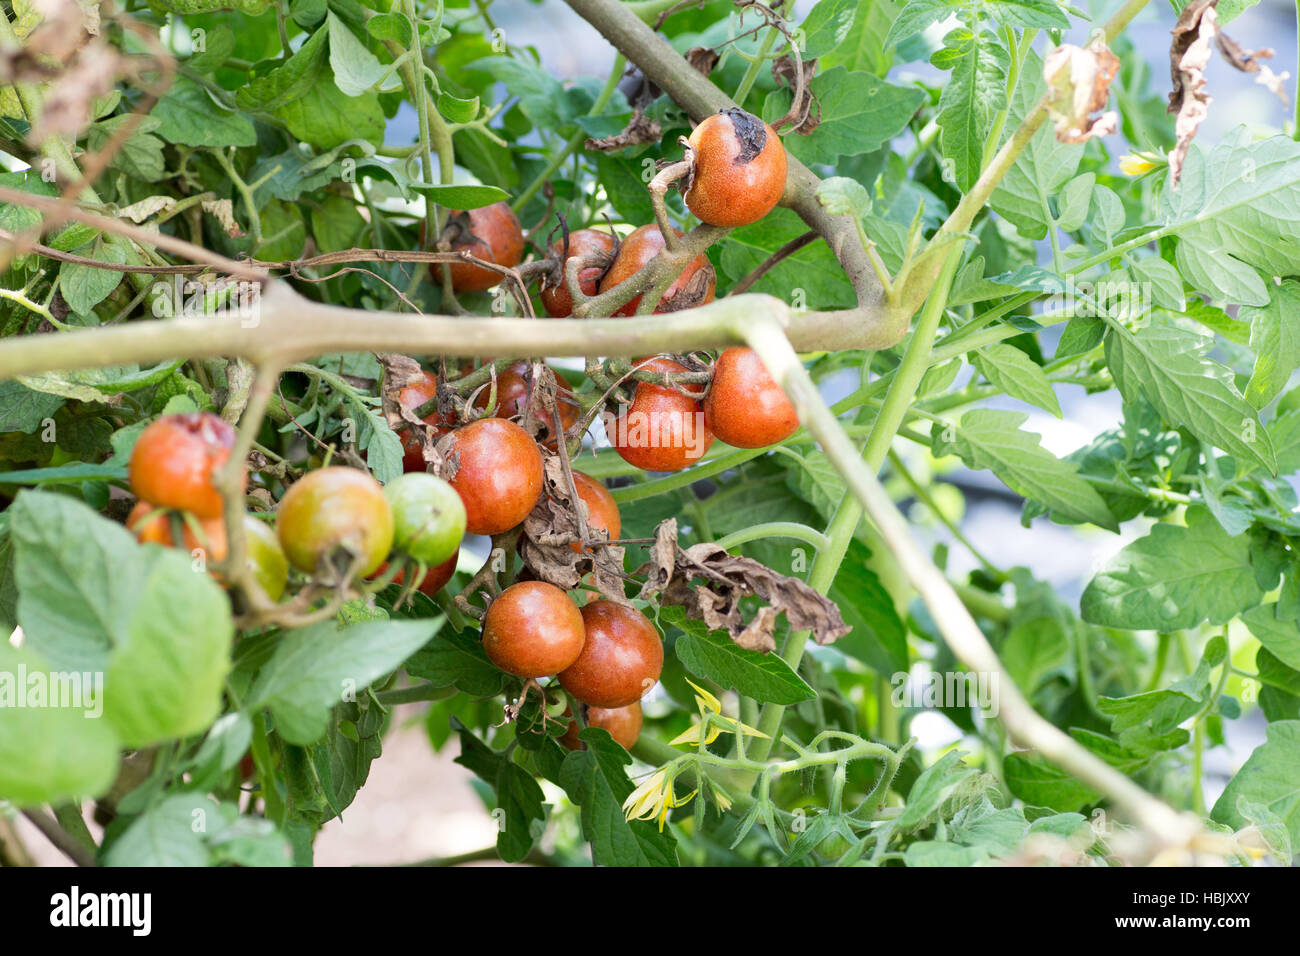 A bunch of rotten cherry tomatoes on farm Stock Photo